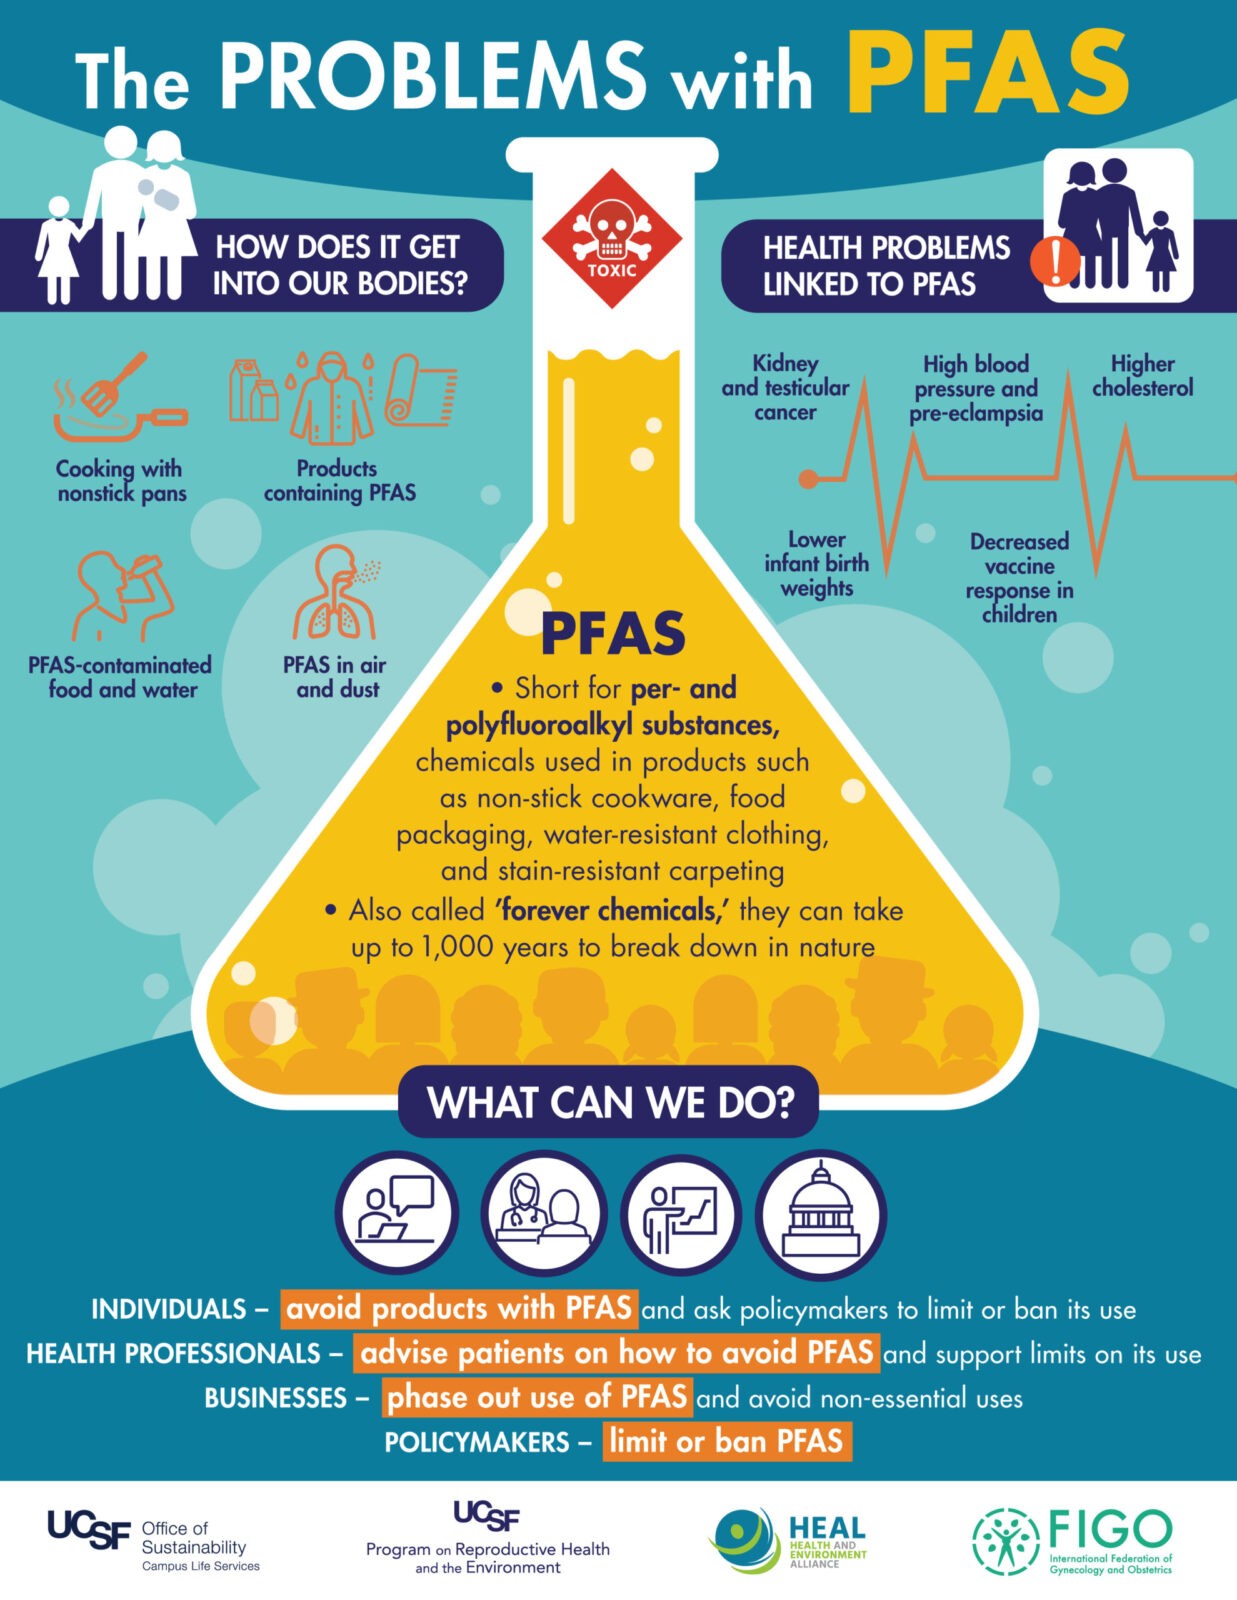 Health and Environment Alliance | How PFAS chemicals affect women, pregnancy and human development: Health actors call for urgent action to phase them out